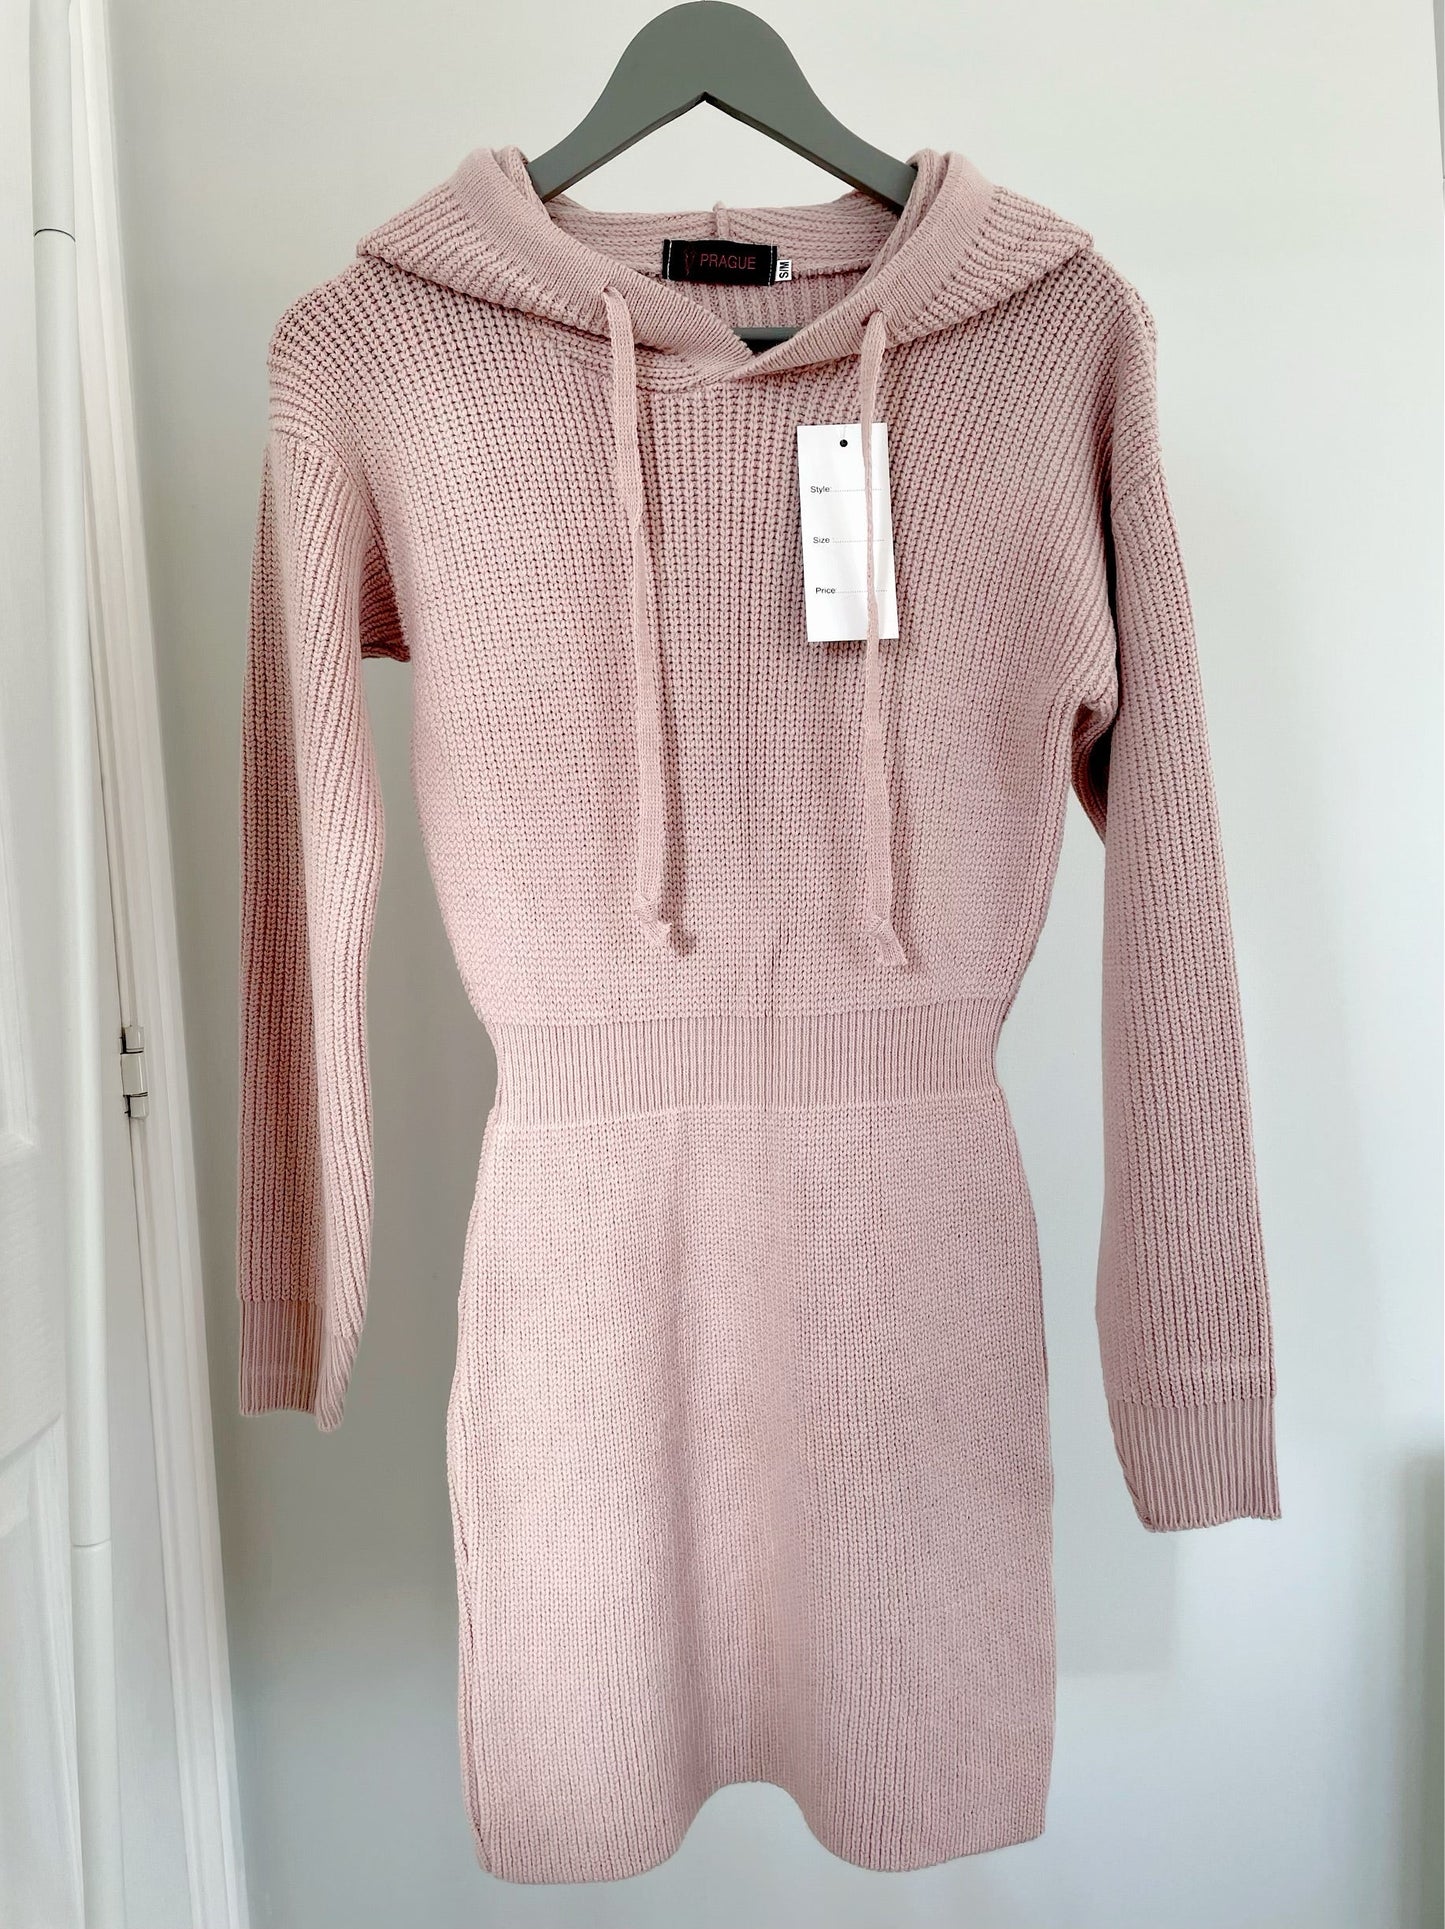 Pale Pink Knitted Jumper Dress